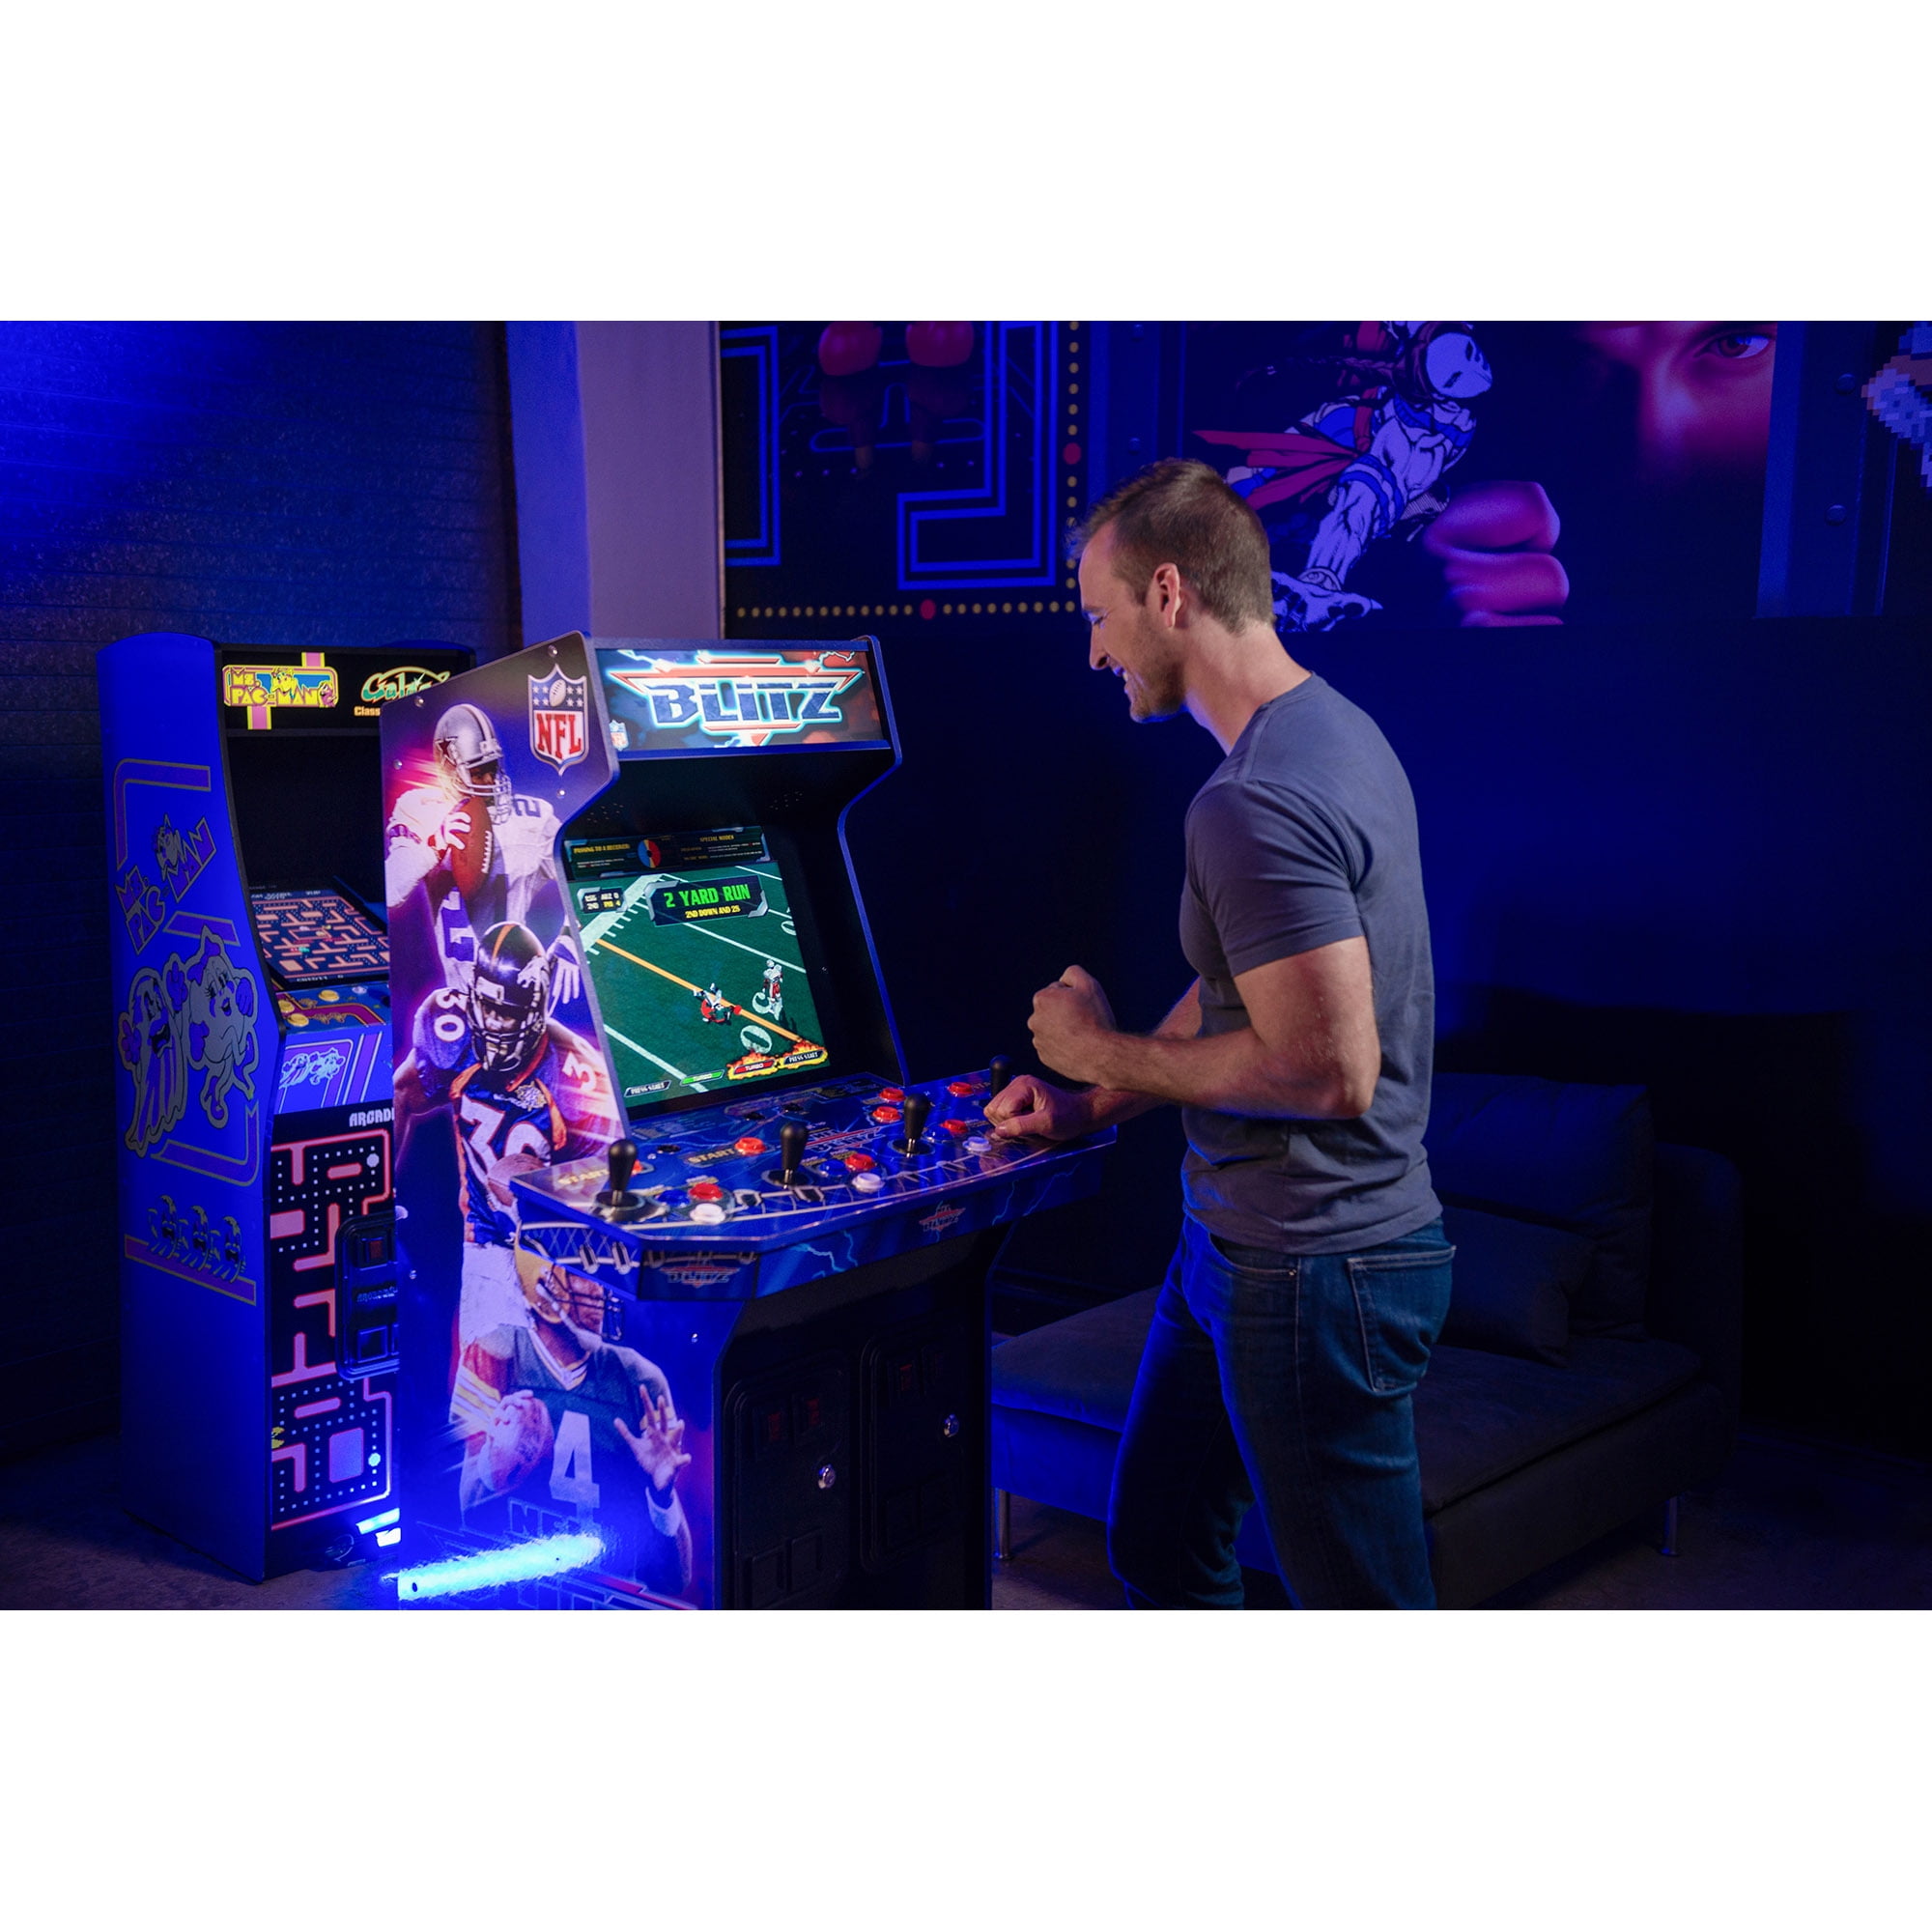 Arcade1Up NFL Blitz Legends Arcade Machine - 4 Player, 5-foot tall  full-size stand-up game for home with WiFi for online multiplayer,  leaderboards